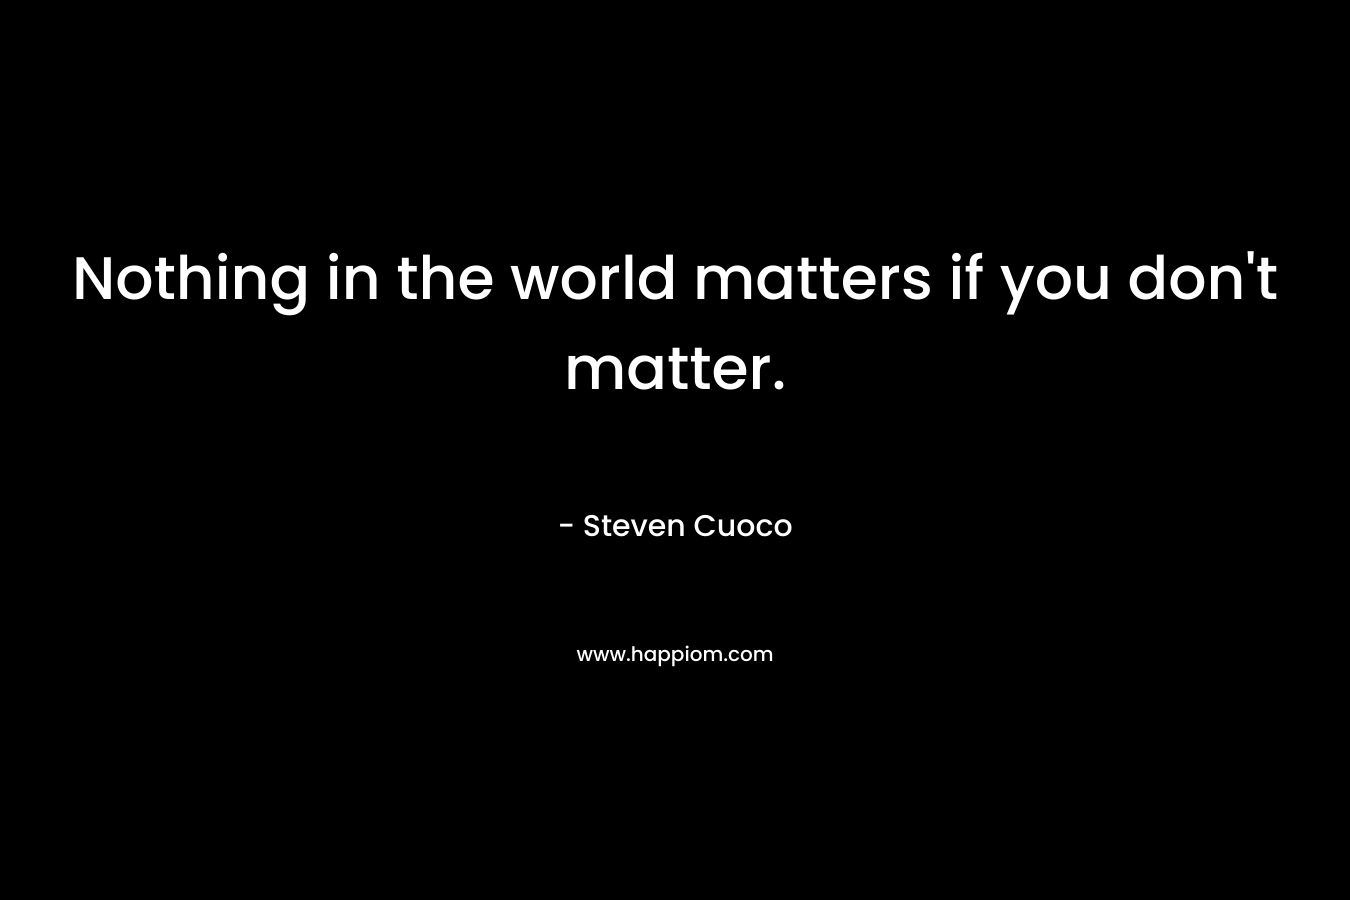 Nothing in the world matters if you don't matter.